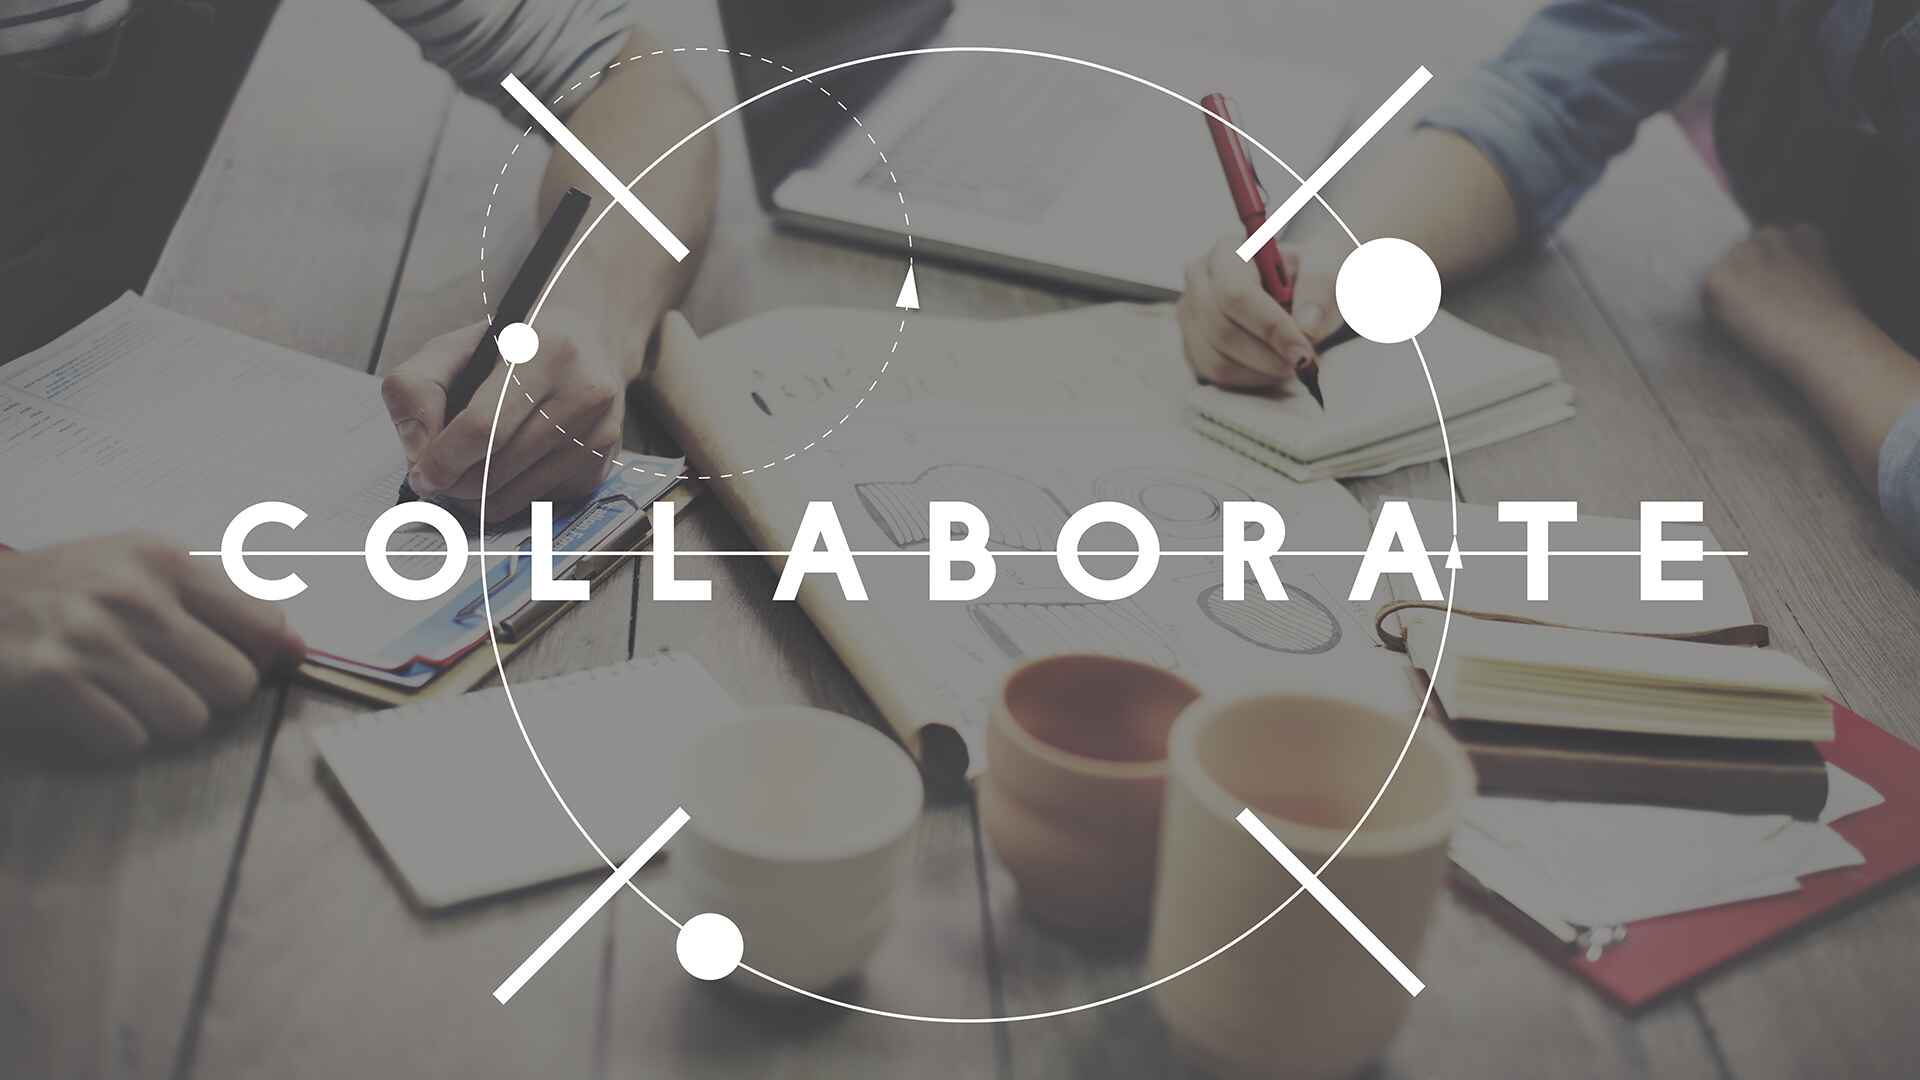 Importance of Collaboration in The Workplace